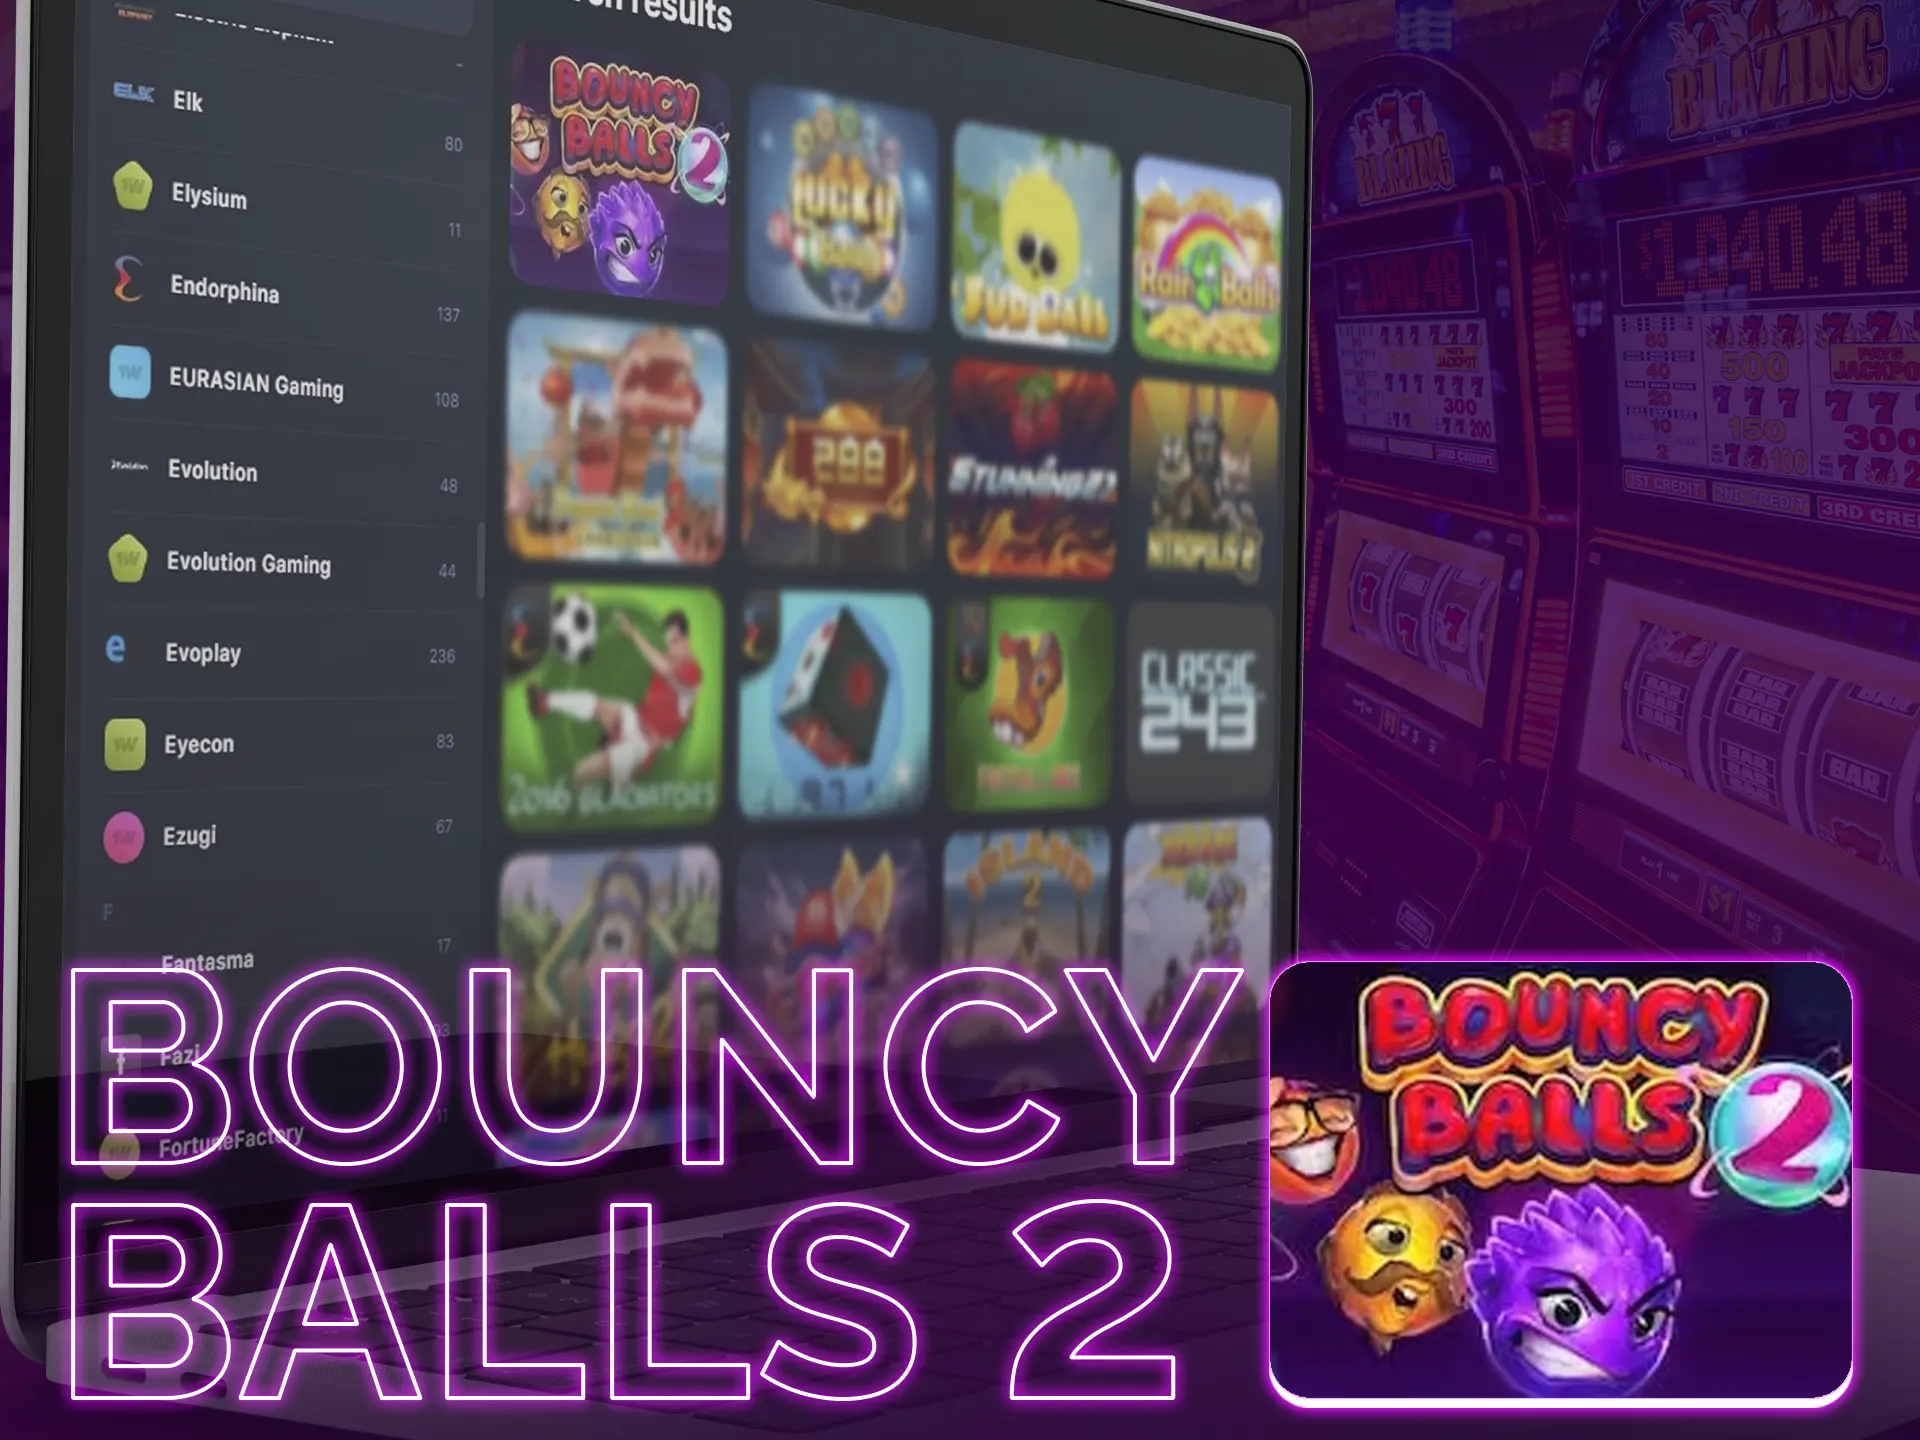 Bouncy Balls 2 offers simple gameplay, colorful balls, high RTP for wins.